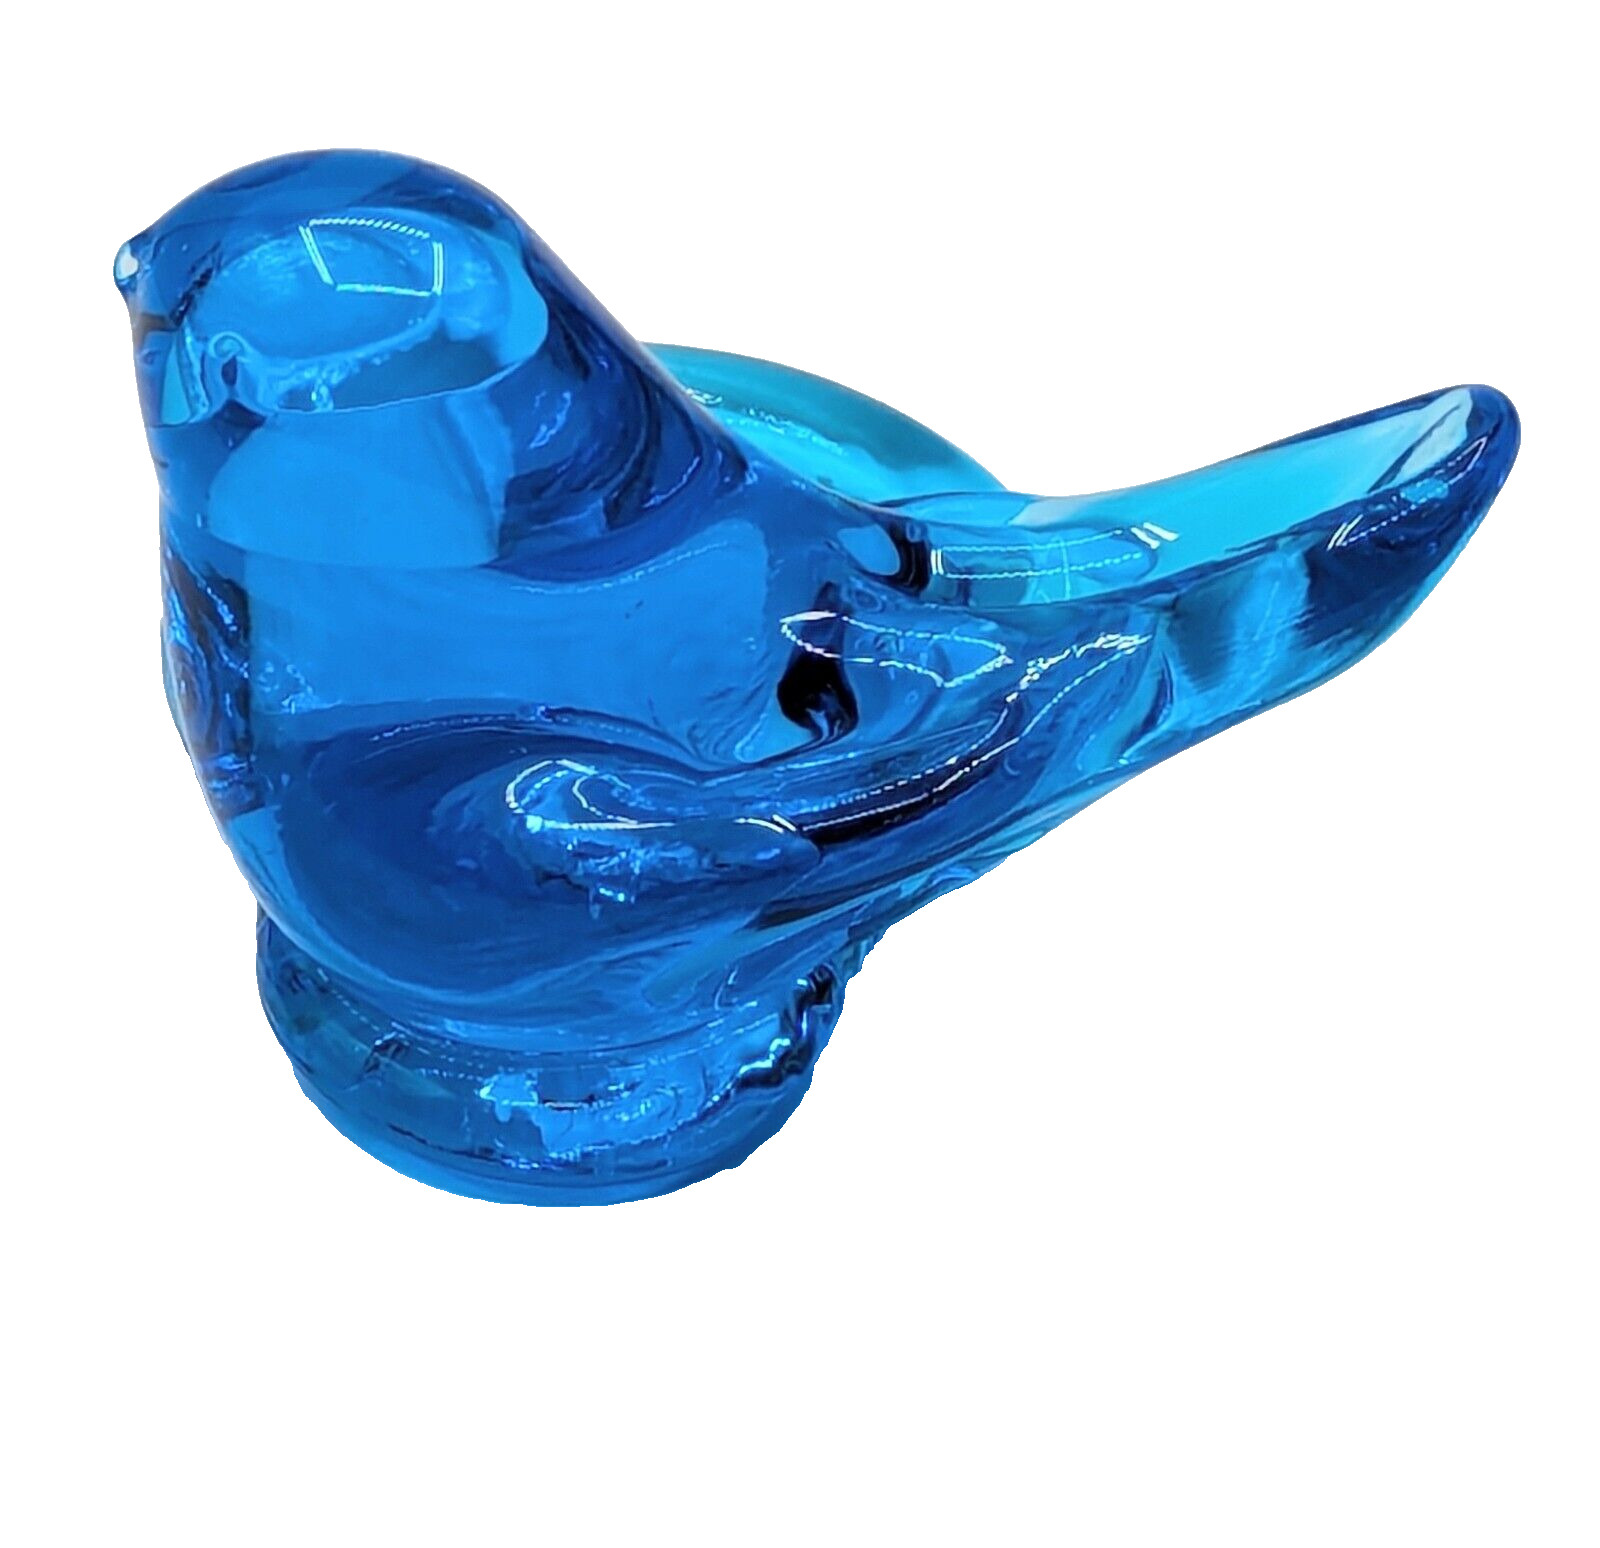 Vintage Blue Bird of Happiness Candle Holder Signed 1990 Art Glass